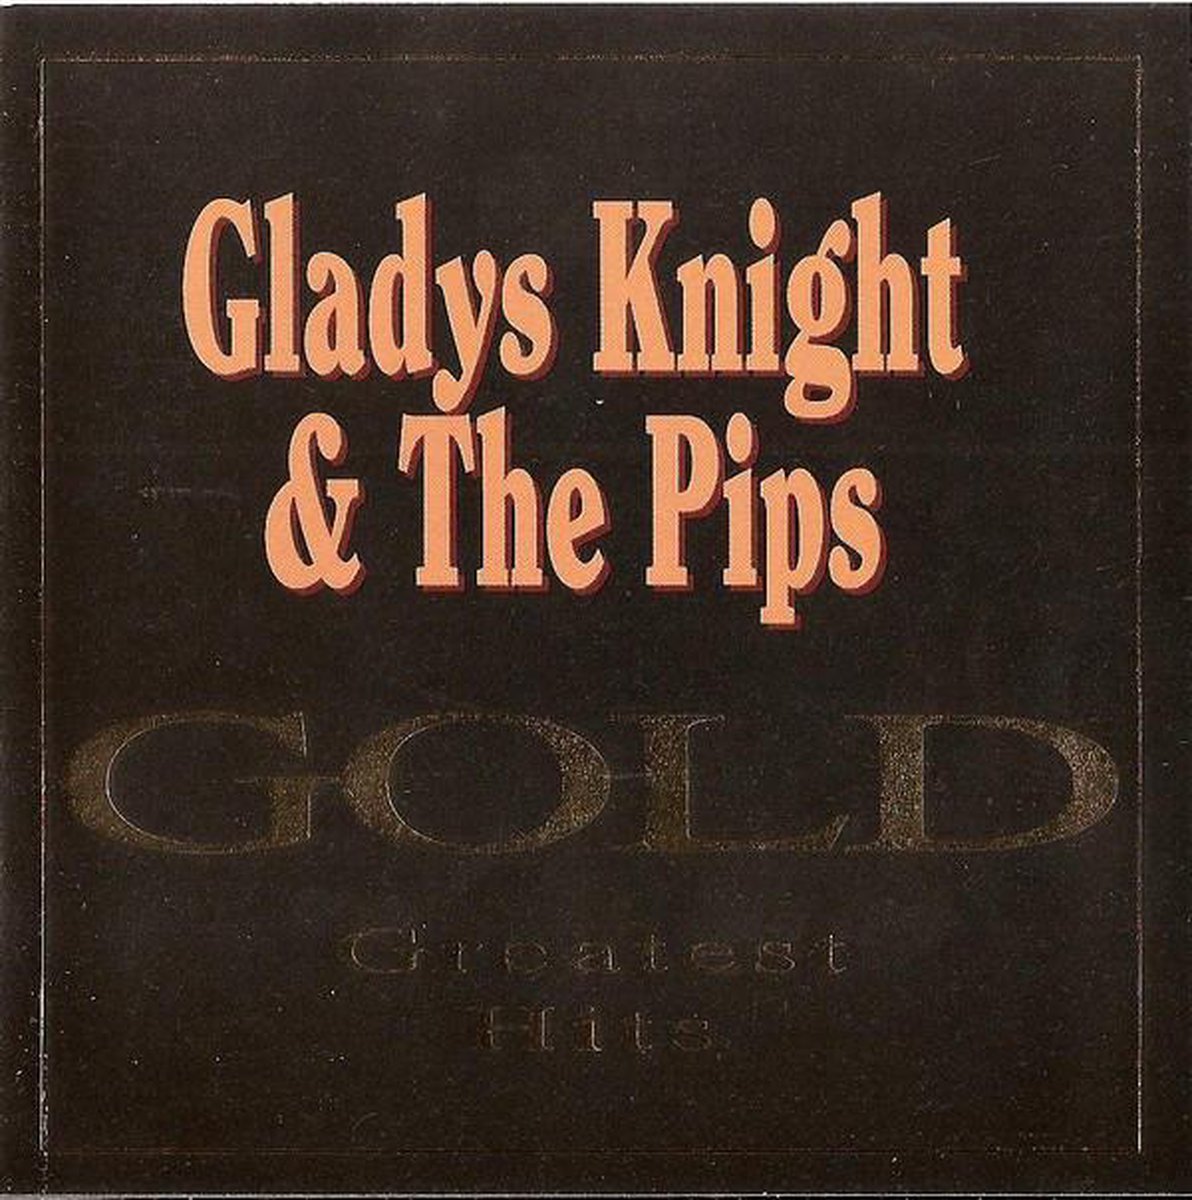 Gladys Knight & the pips - Gold - Greatest hits - Gladys Knight & the Pips